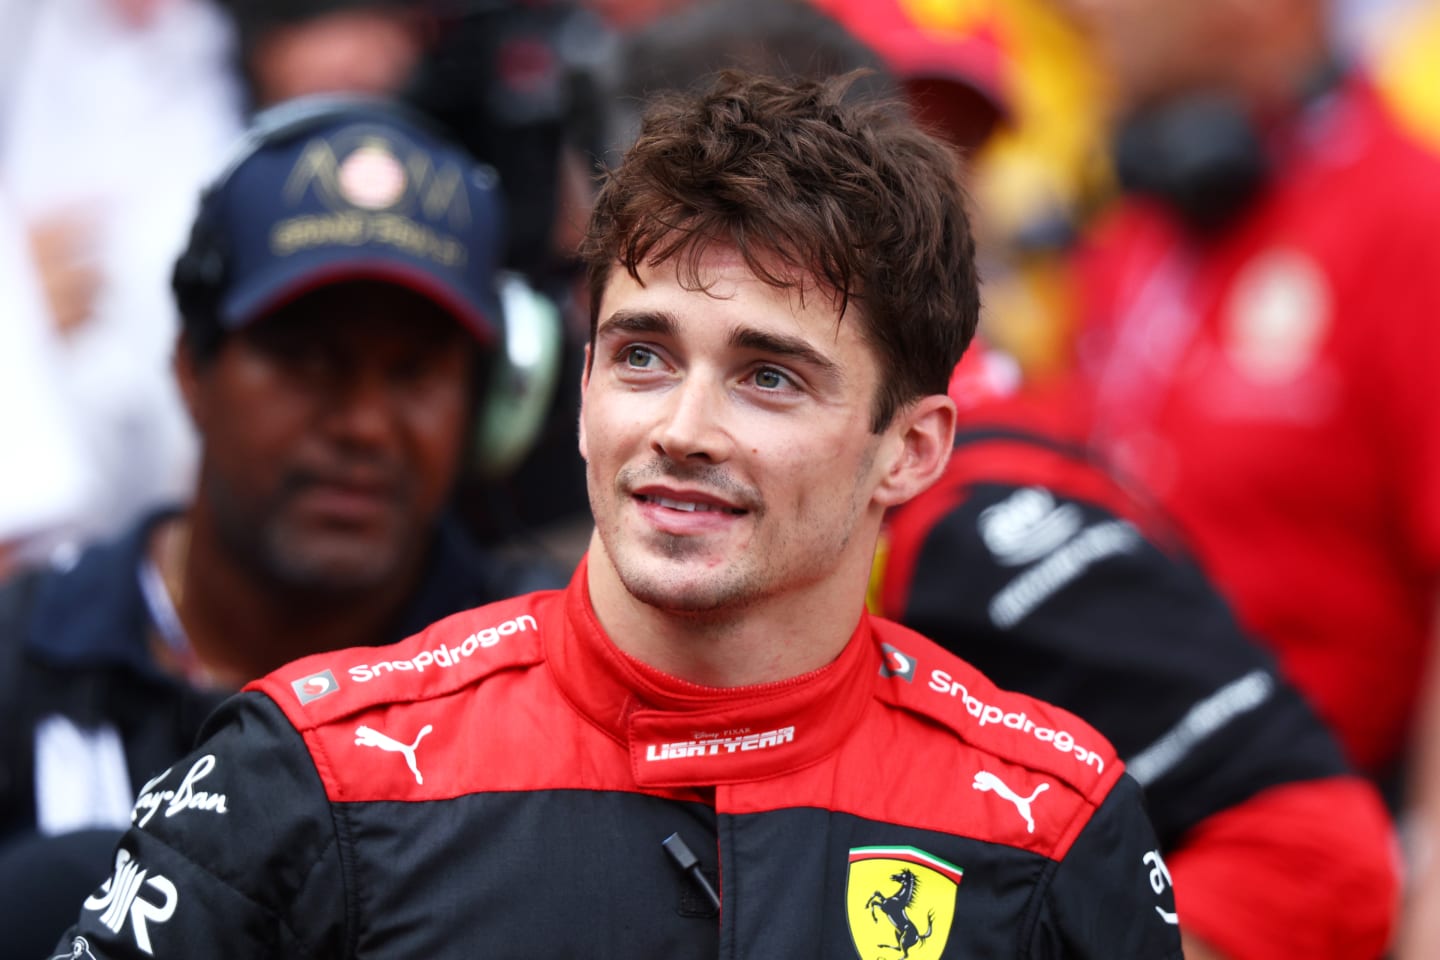 MONTE-CARLO, MONACO - MAY 28: Pole position qualifier Charles Leclerc of Monaco and Ferrari smiles in parc ferme during qualifying ahead of the F1 Grand Prix of Monaco at Circuit de Monaco on May 28, 2022 in Monte-Carlo, Monaco. (Photo by Clive Rose/Getty Images)